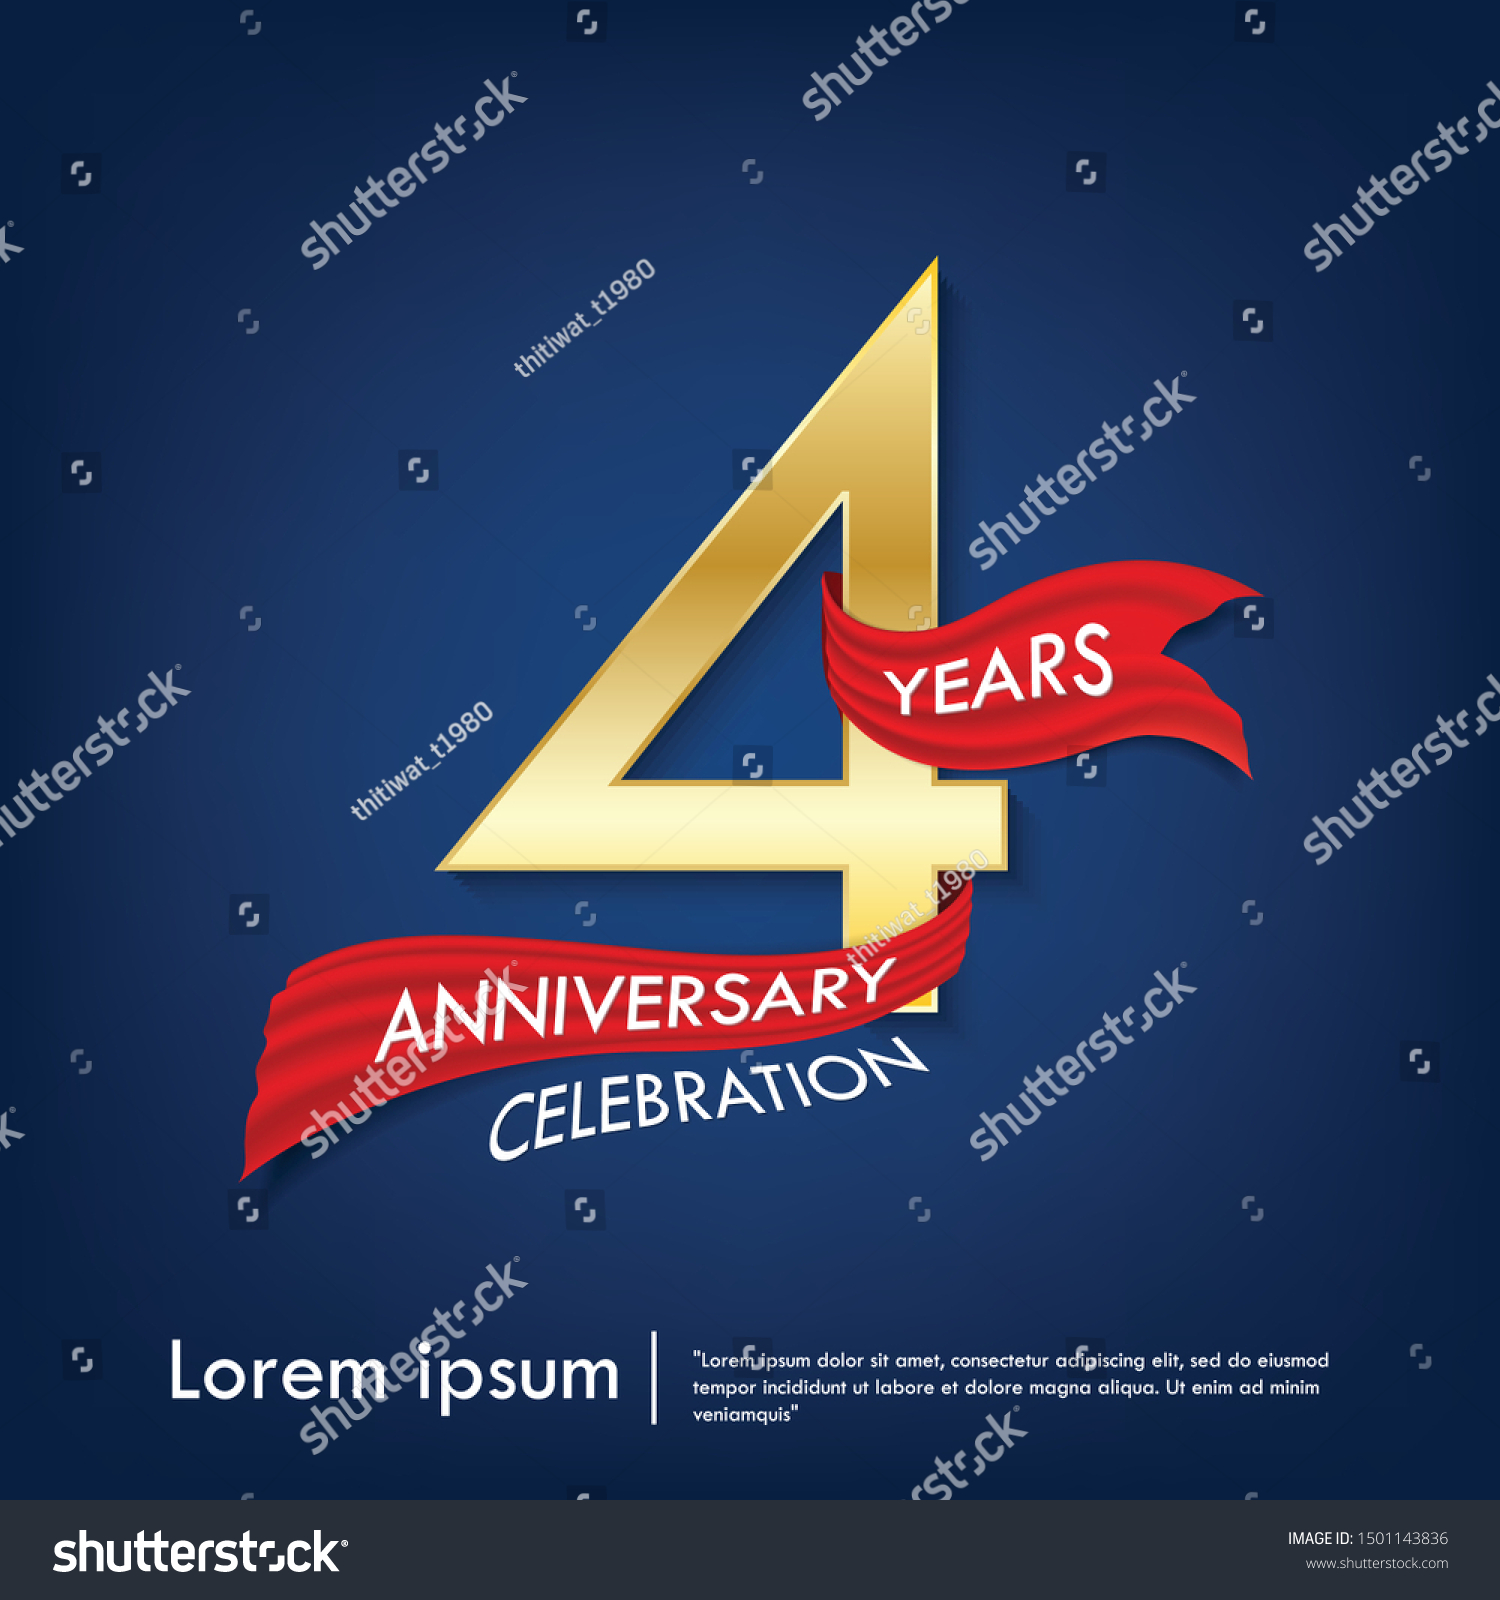 SVG of 4th years anniversary celebration emblem. anniversary elegance golden logo with red ribbon on dark blue background, vector illustration template design for celebration greeting and invitation card svg